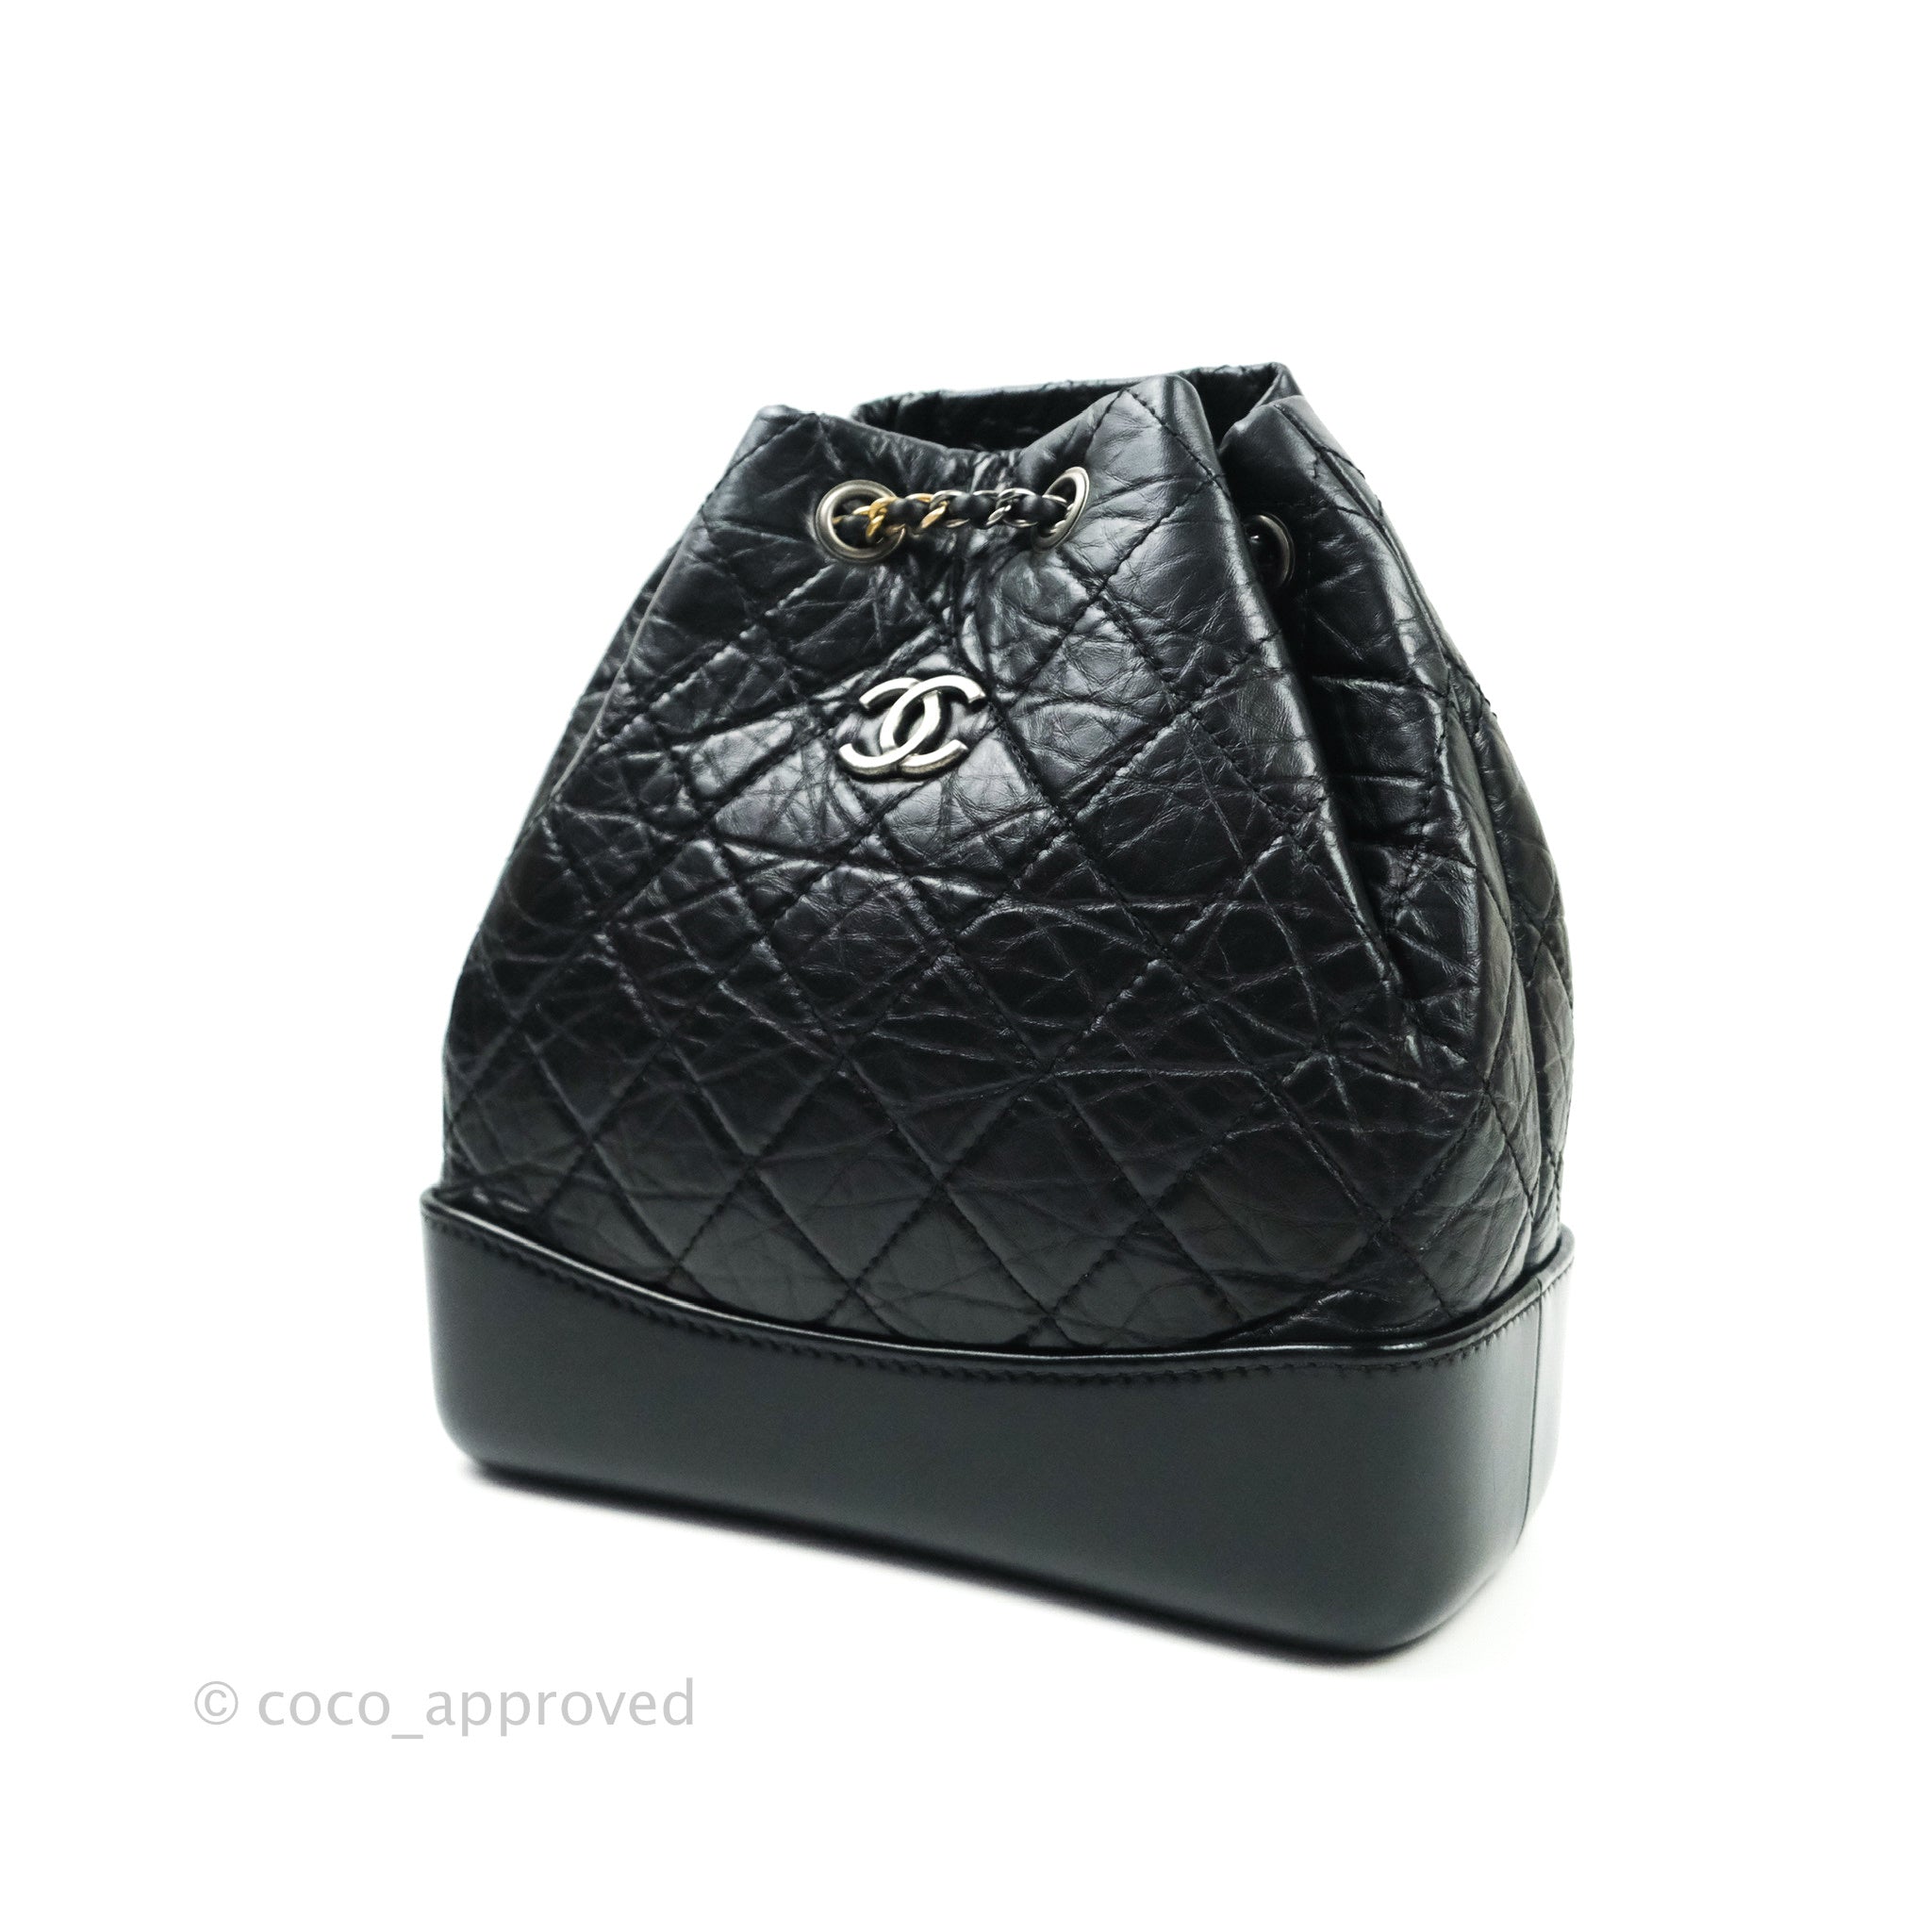 Chanel Small Gabrielle Backpack Black Aged Calfskin Multi-tone hardware